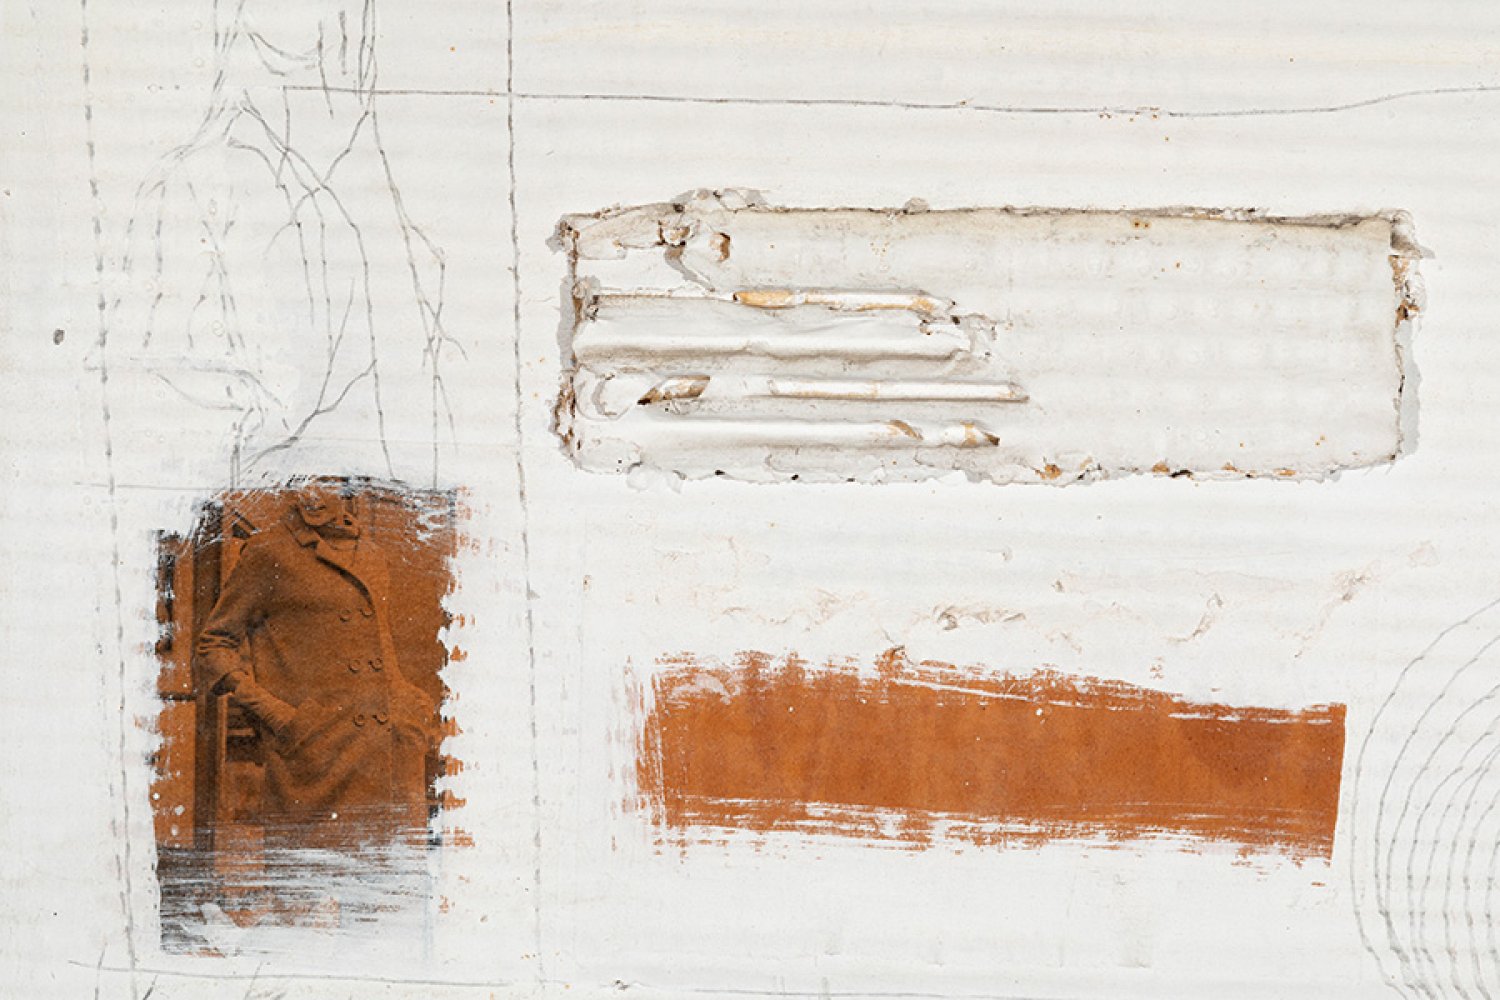 ALBERT RÀFOLS CASAMADA (Barcelona, 1923 - 2009).Untitled, 1967.Mixed media and collage on wood. - Image 4 of 5